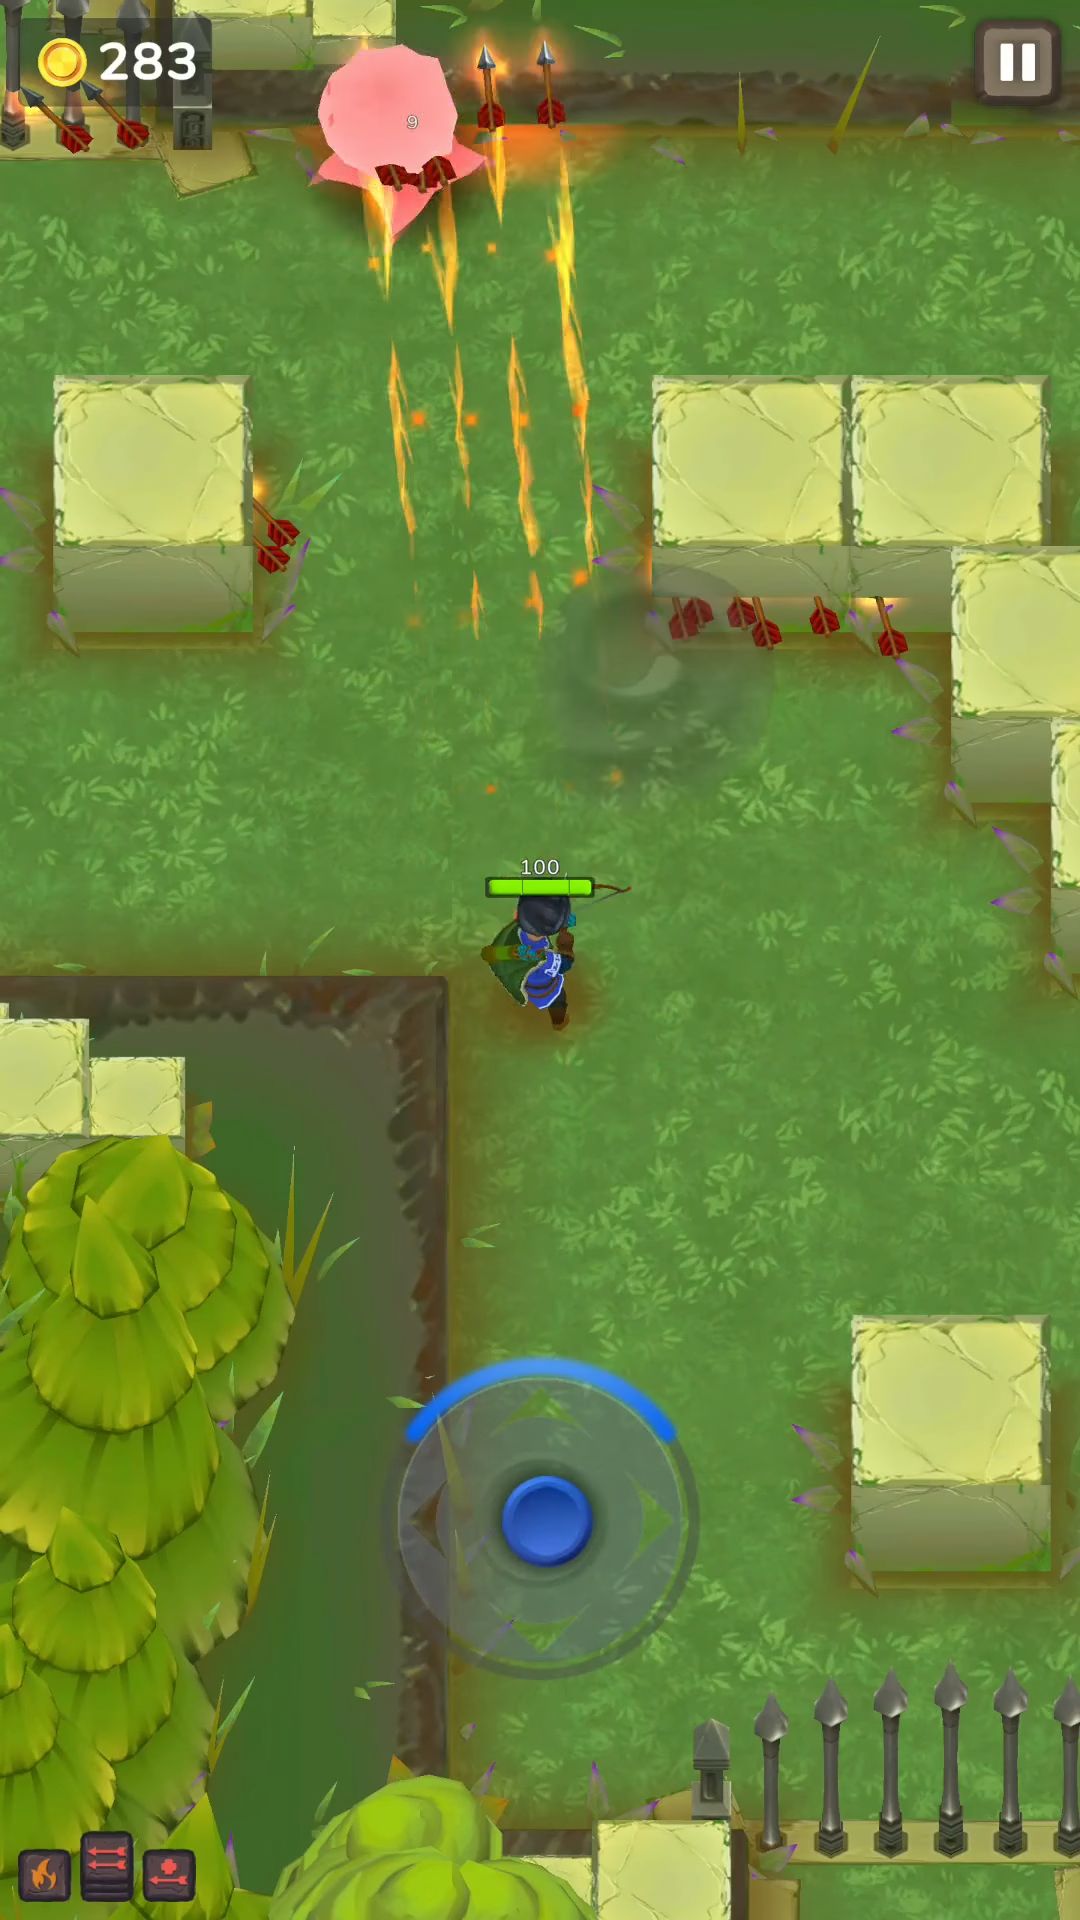 Gameplay of the The Beaten Path for Android phone or tablet.